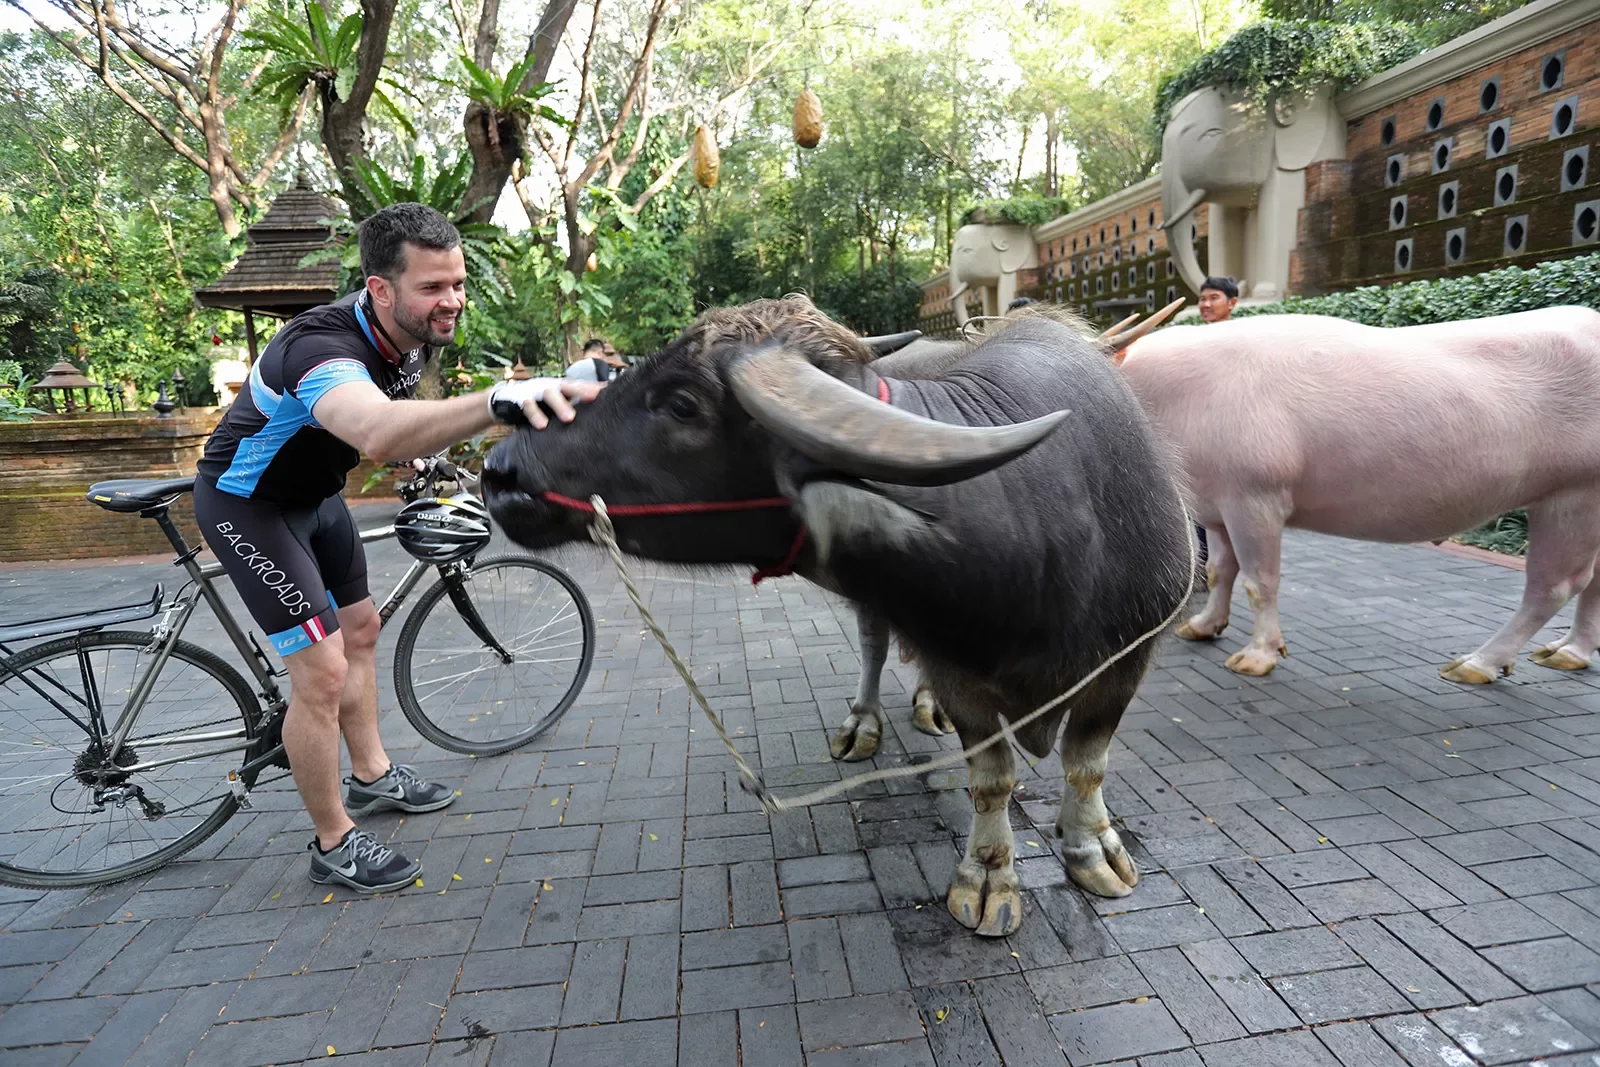 Guest with bike, petting carabao.